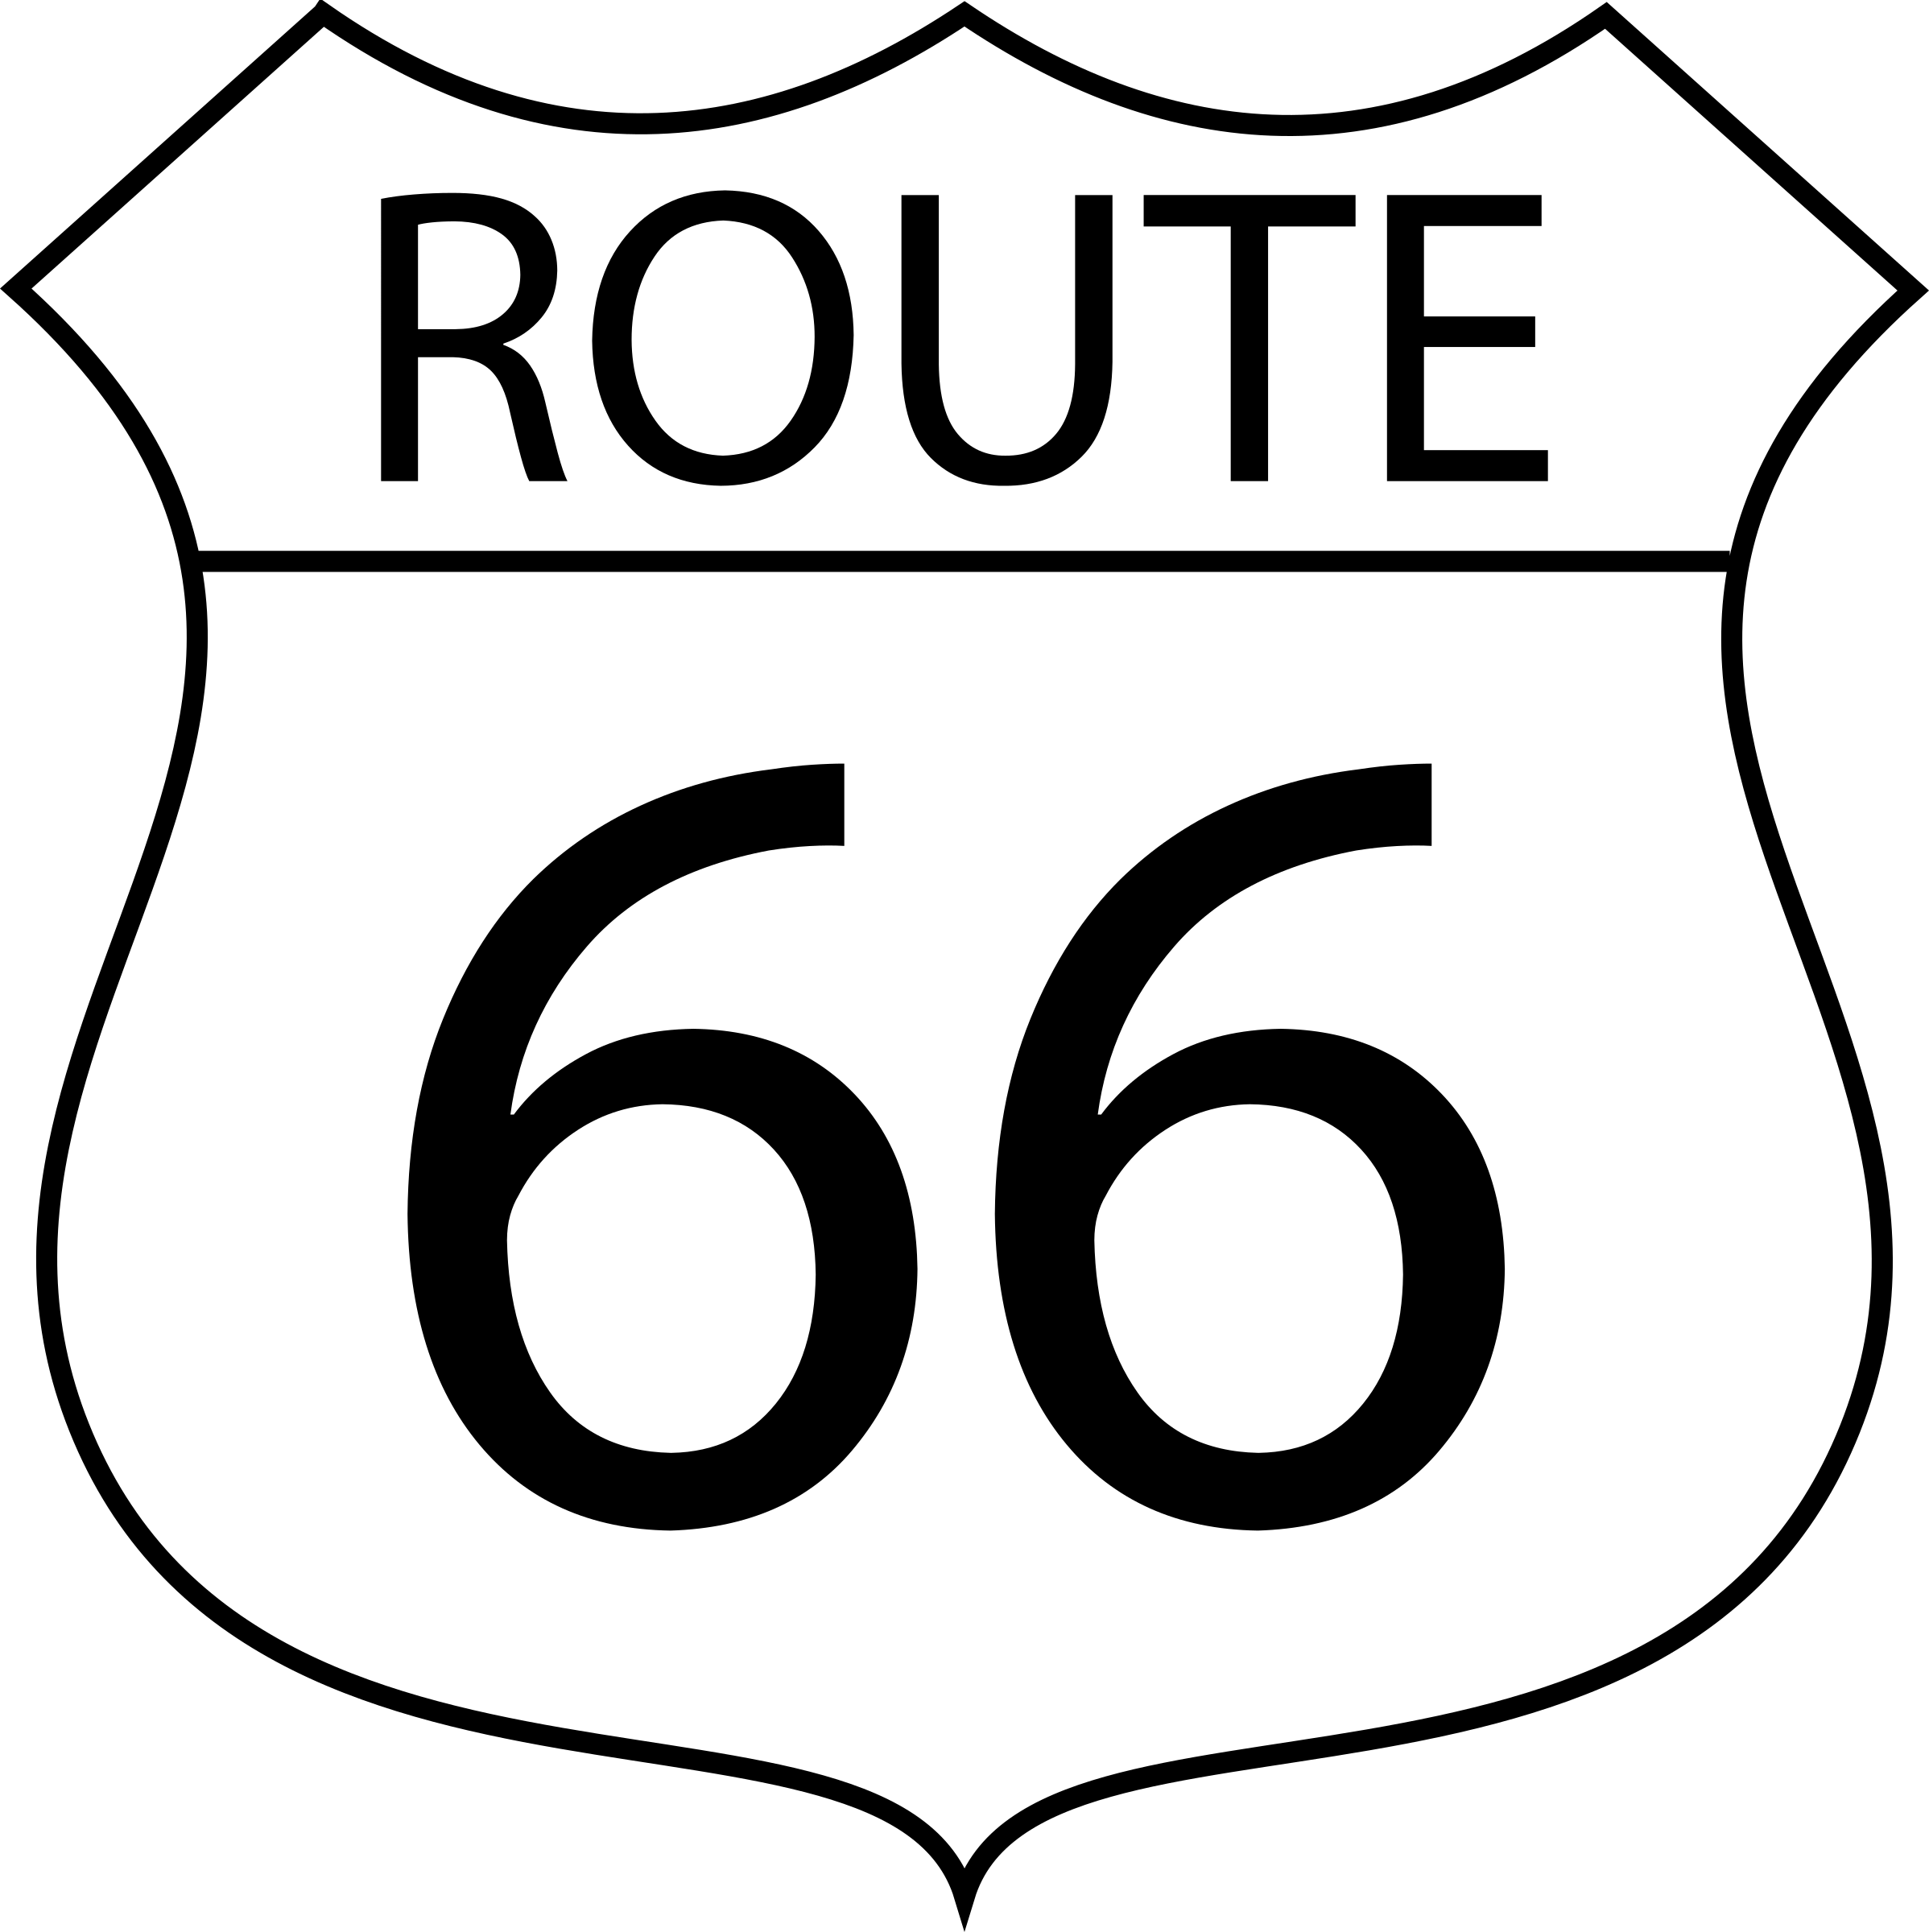 Libraries Receives Grant for “Women of Route 66”